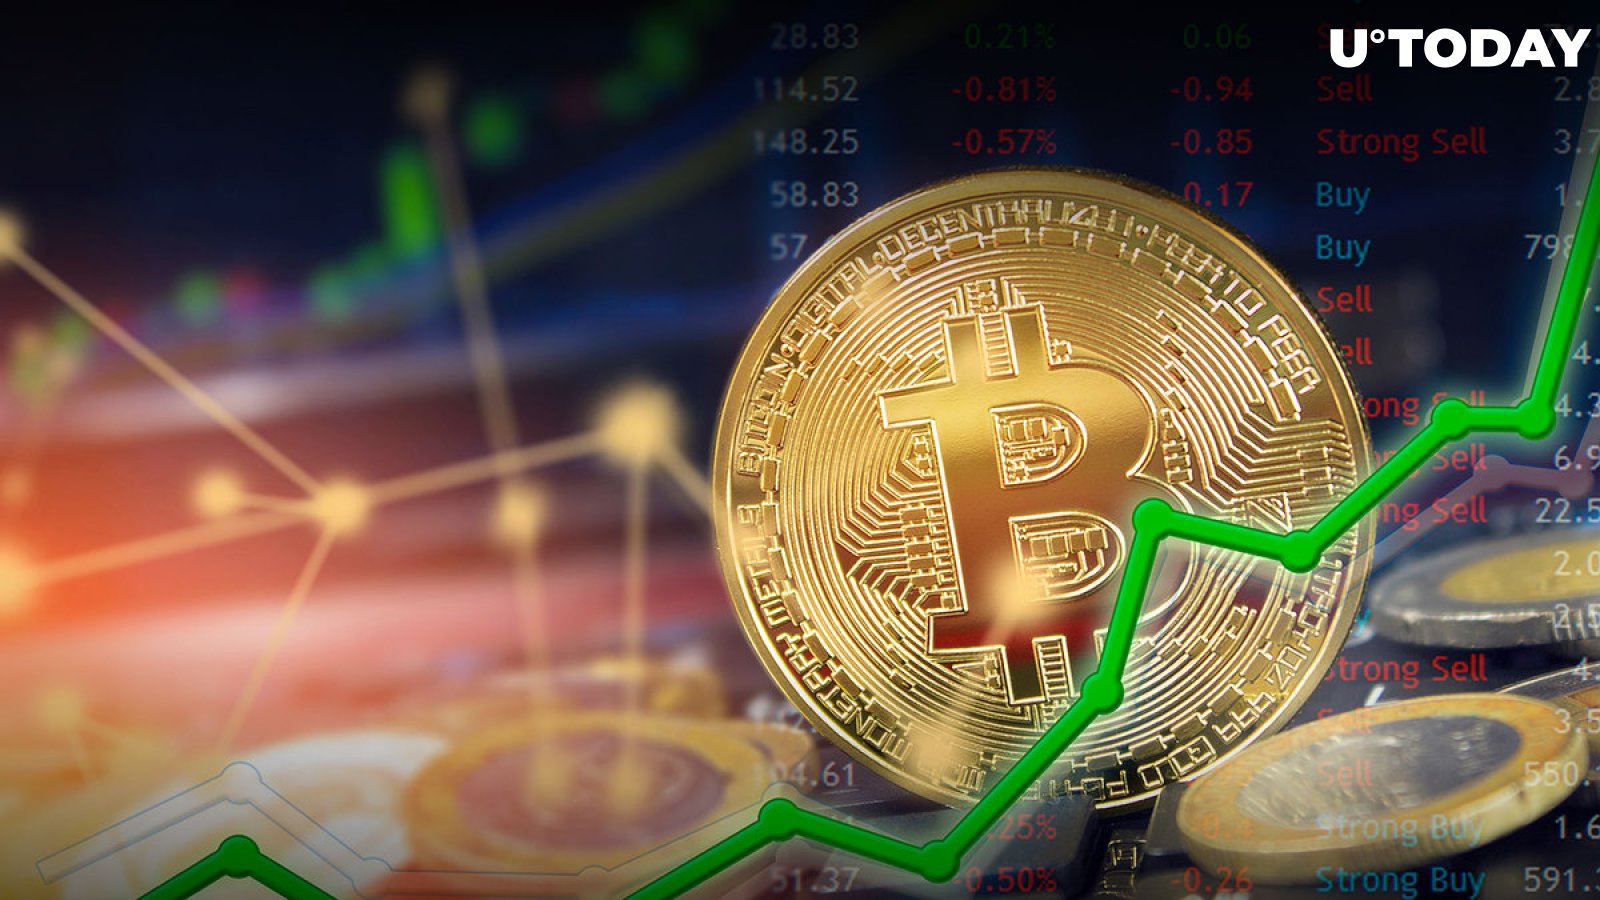 Greed Takes Over Crypto Market as Bitcoin (BTC) Prints Big Green Candle